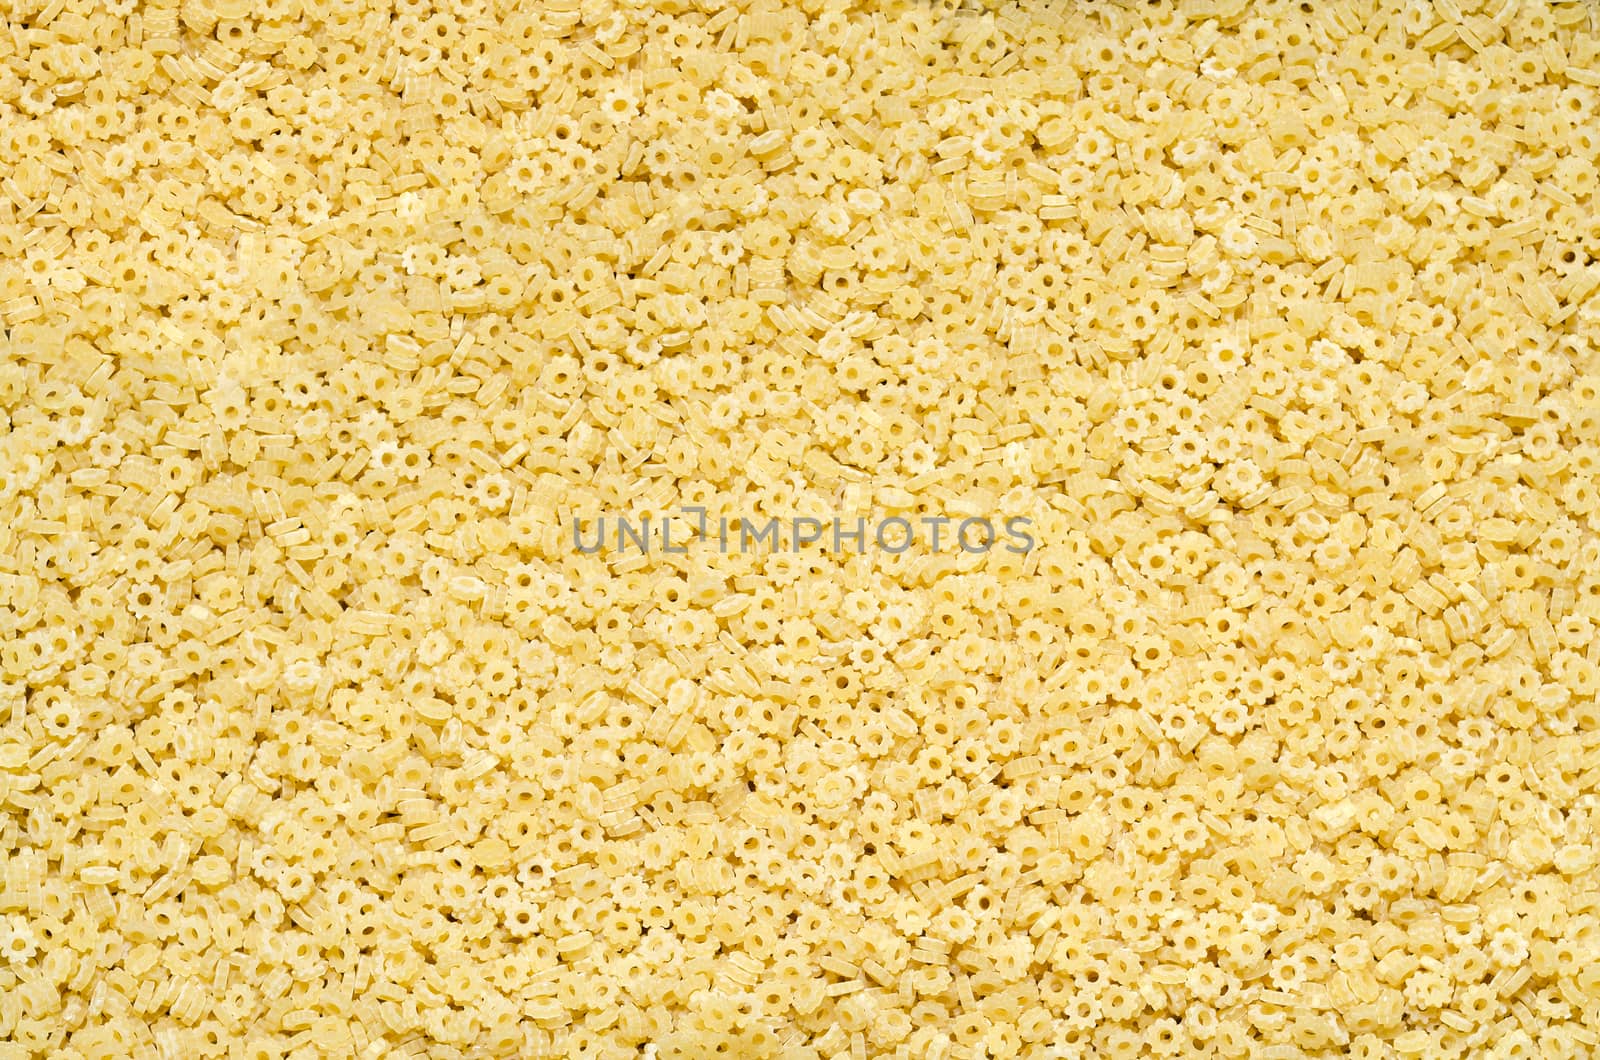 Textured background of small shaped pasta, scattered on the surface.